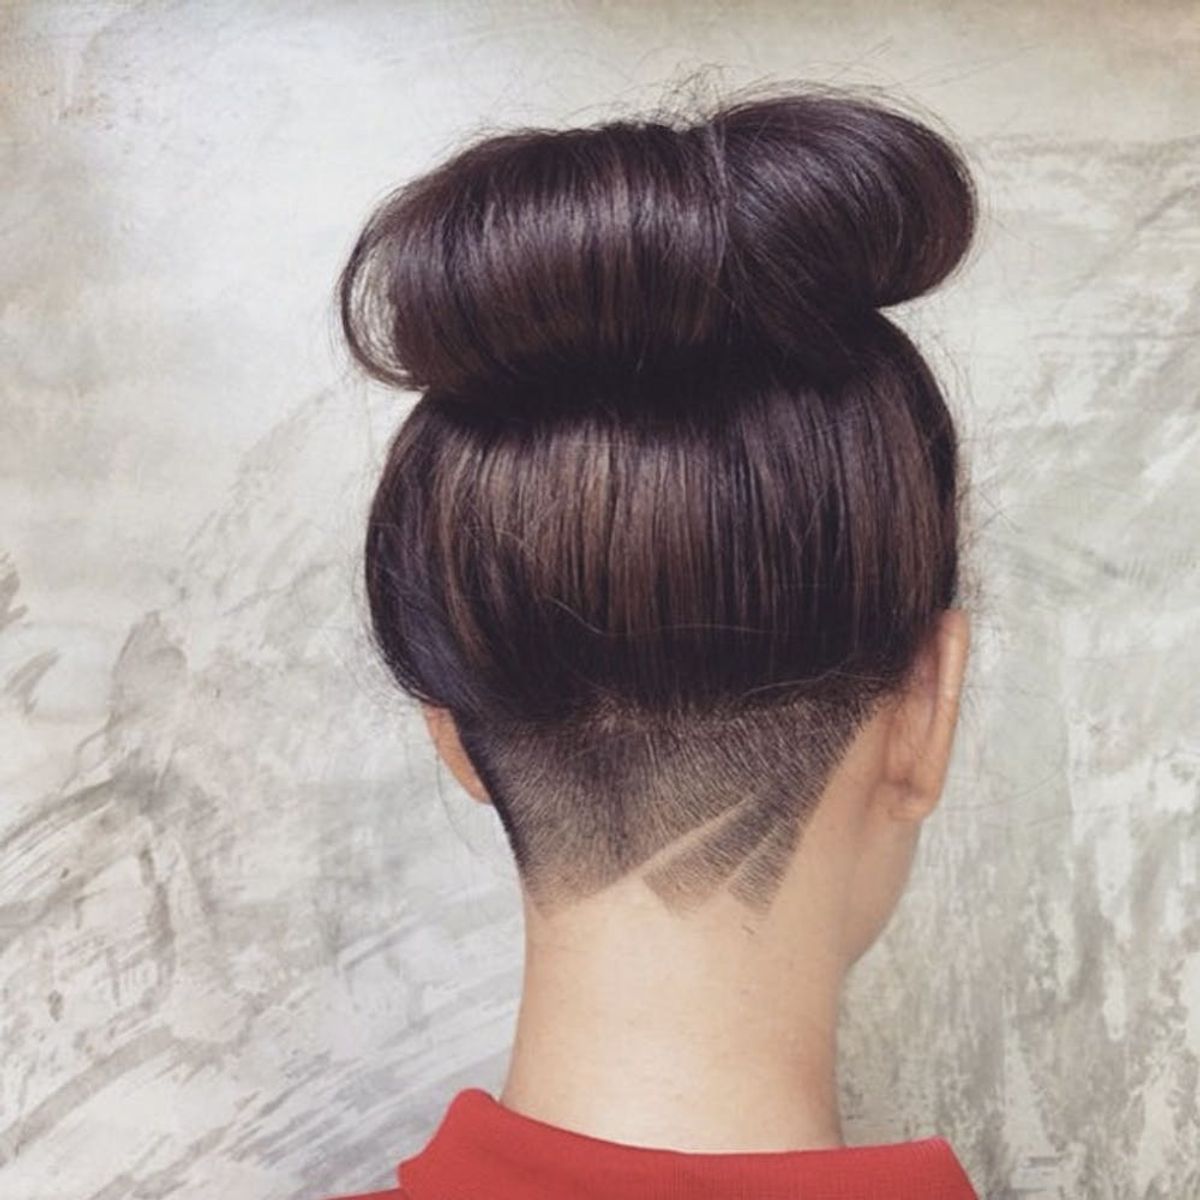 10 Undercut Tattoos You *Need* to Try ASAP